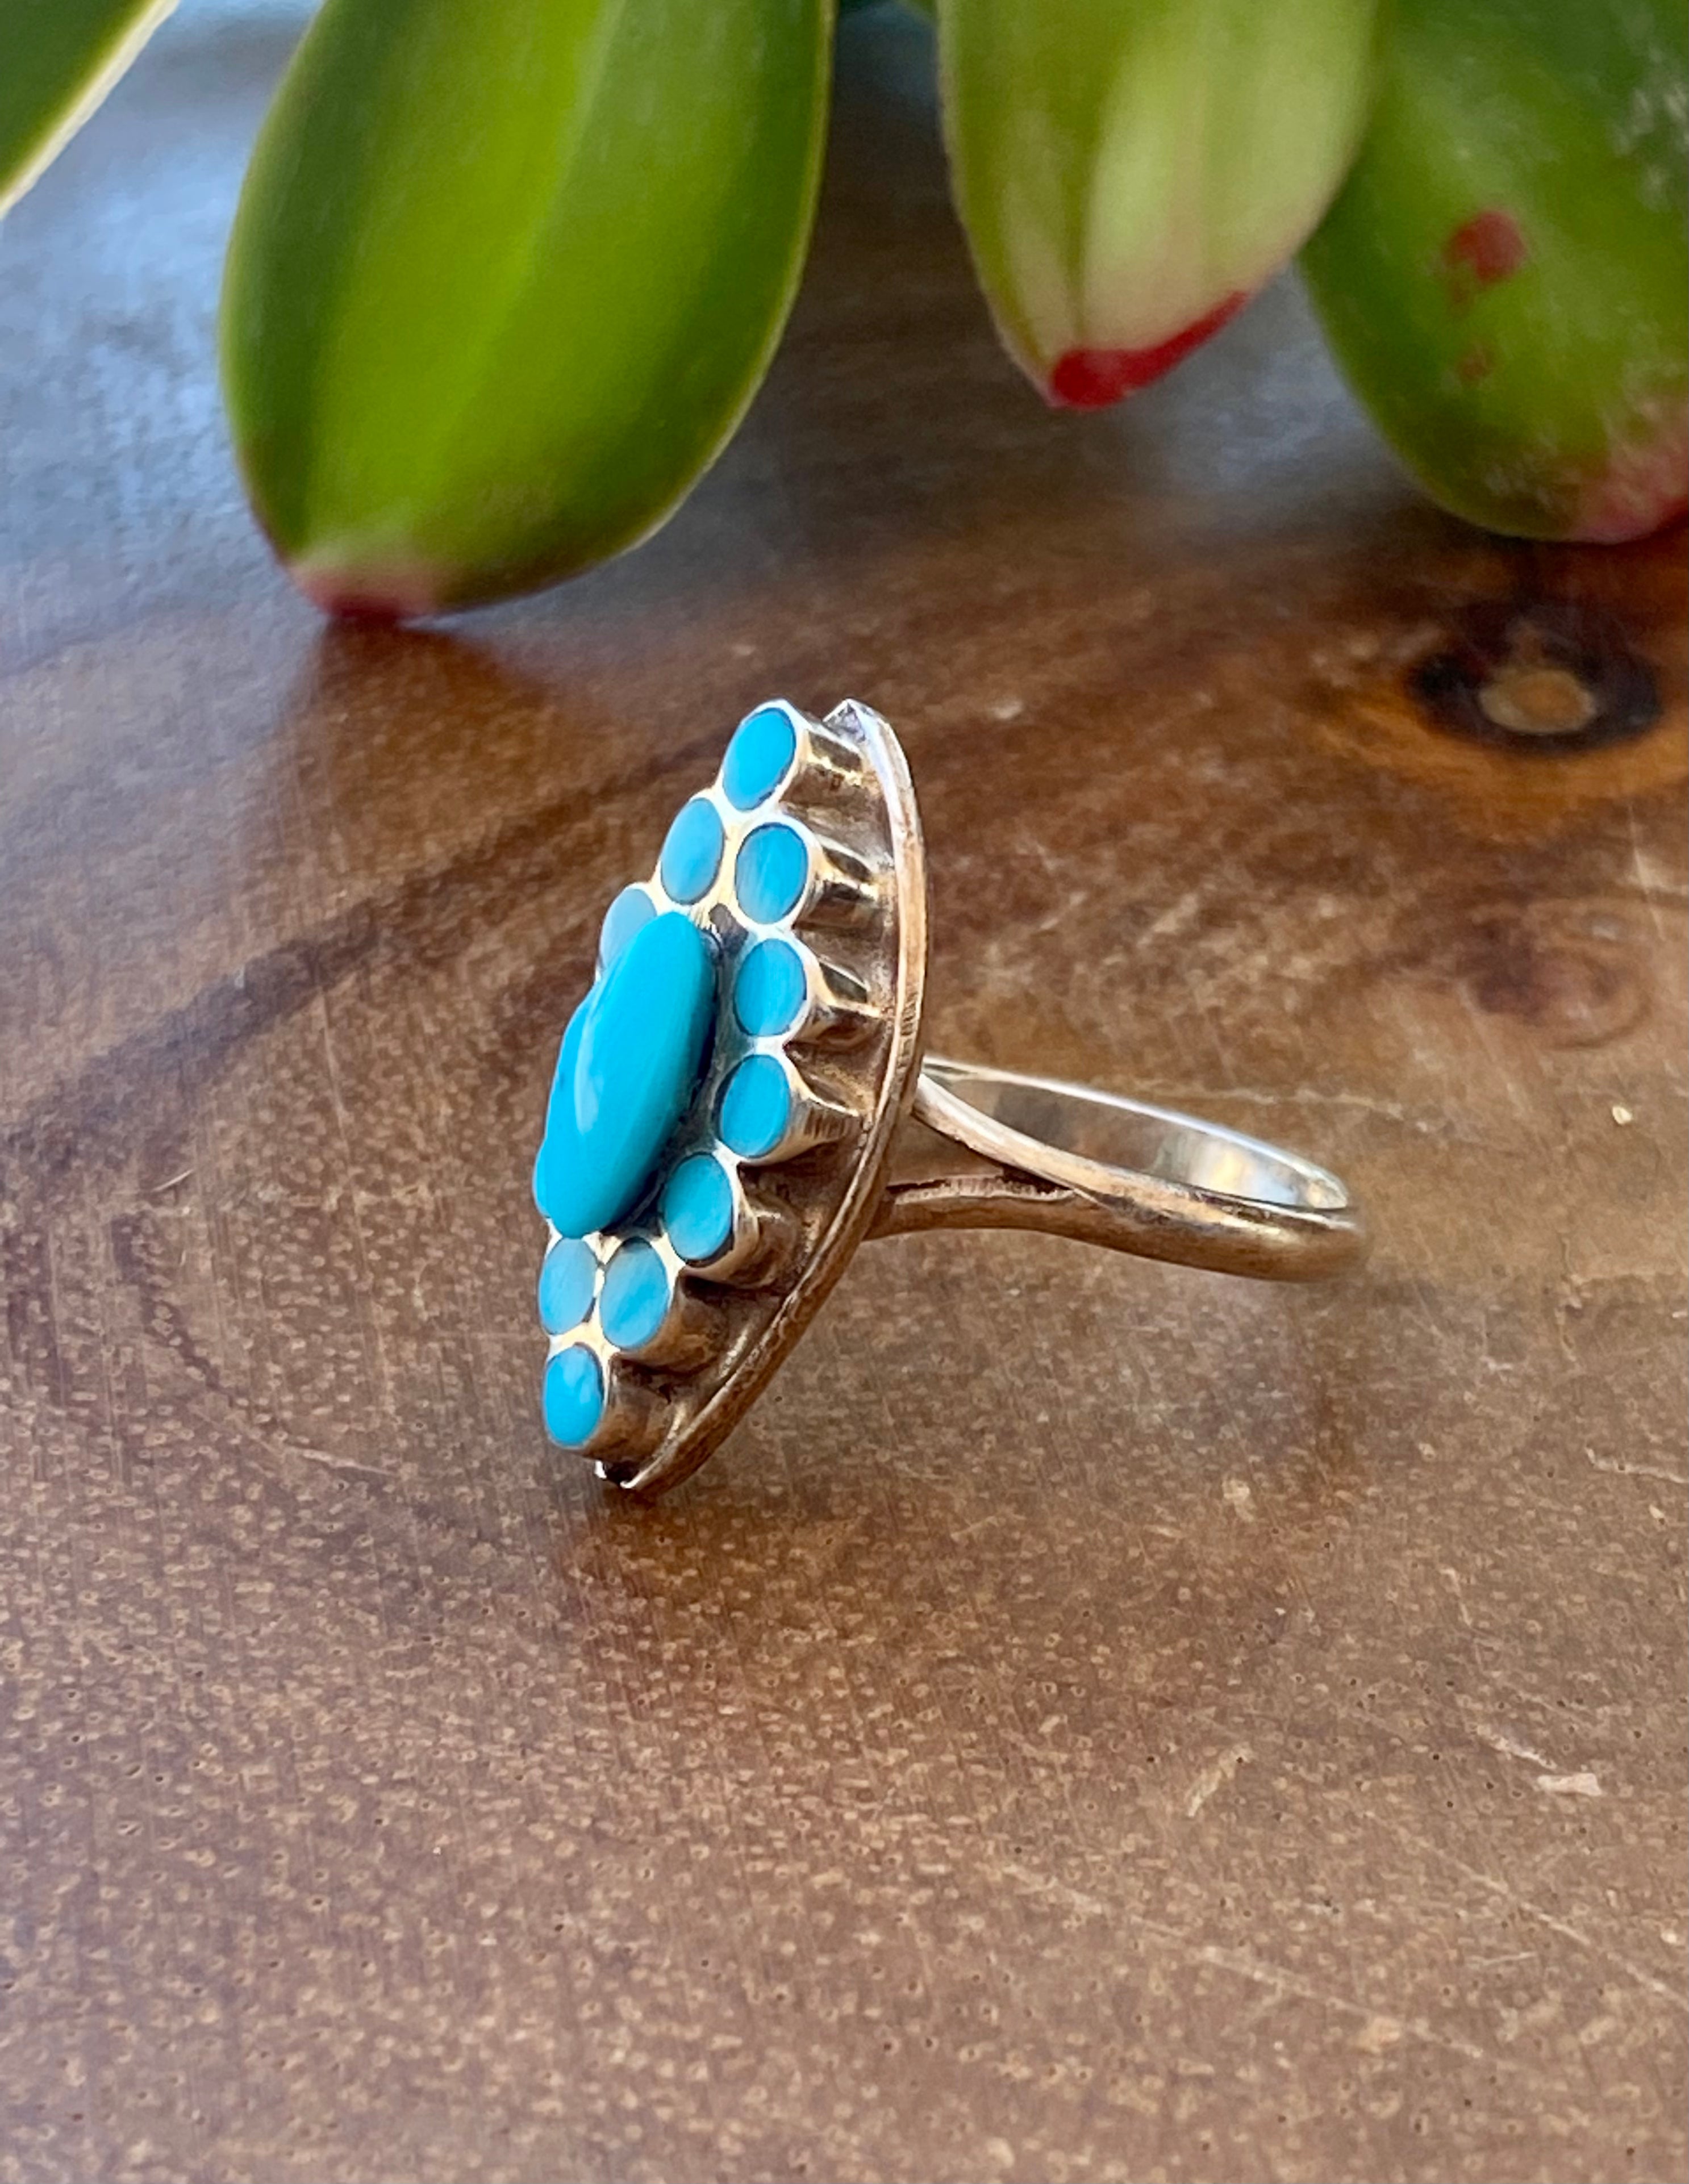 Zuni Made Turquoise & Sterling Silver Inlay Ring Size 8.25